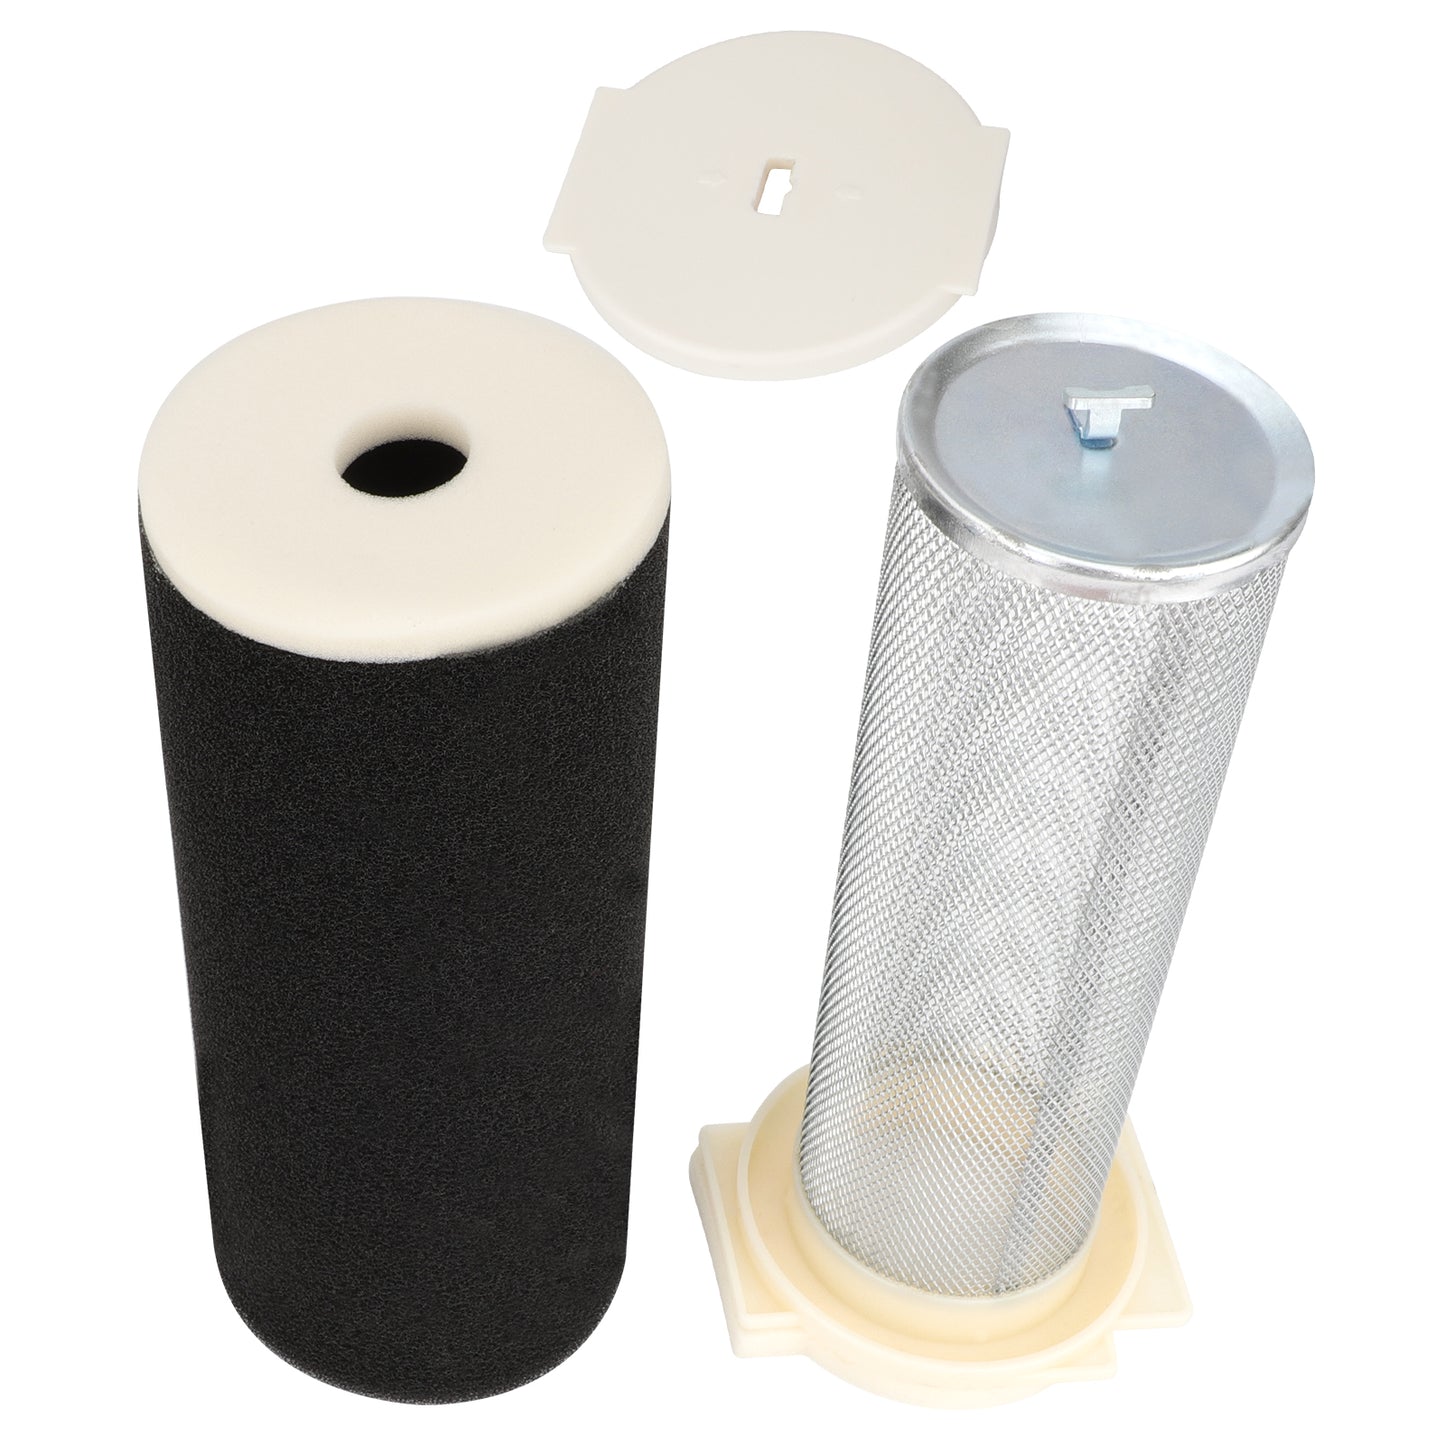 Durable Air Filter Kit - Premium Quality for Yamaha Raptor, Warrior, Wolverine, and Grizzly Models